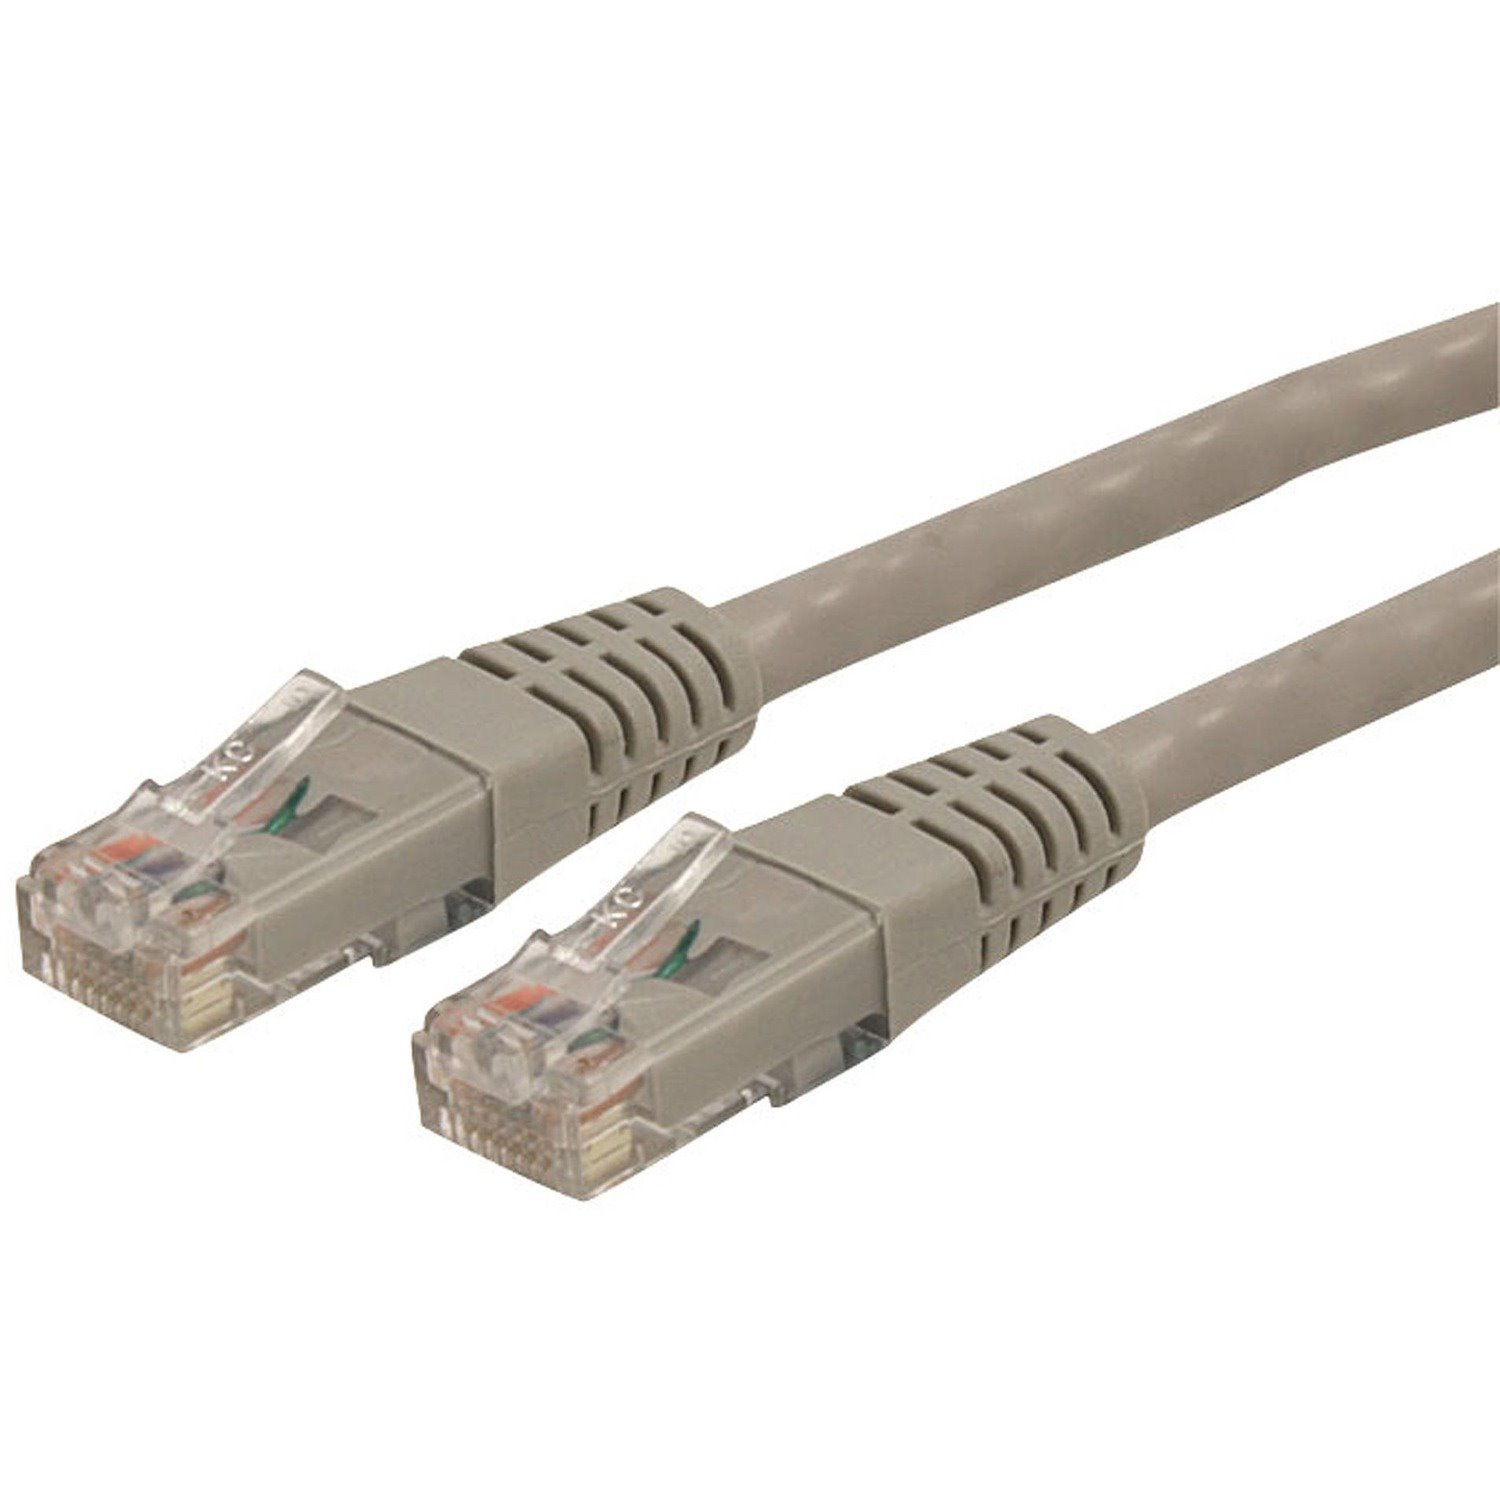 StarTech.com 5ft CAT6 Ethernet Cable - Gray Molded Gigabit - 100W PoE UTP 650MHz - Category 6 Patch Cord UL Certified Wiring/TIA